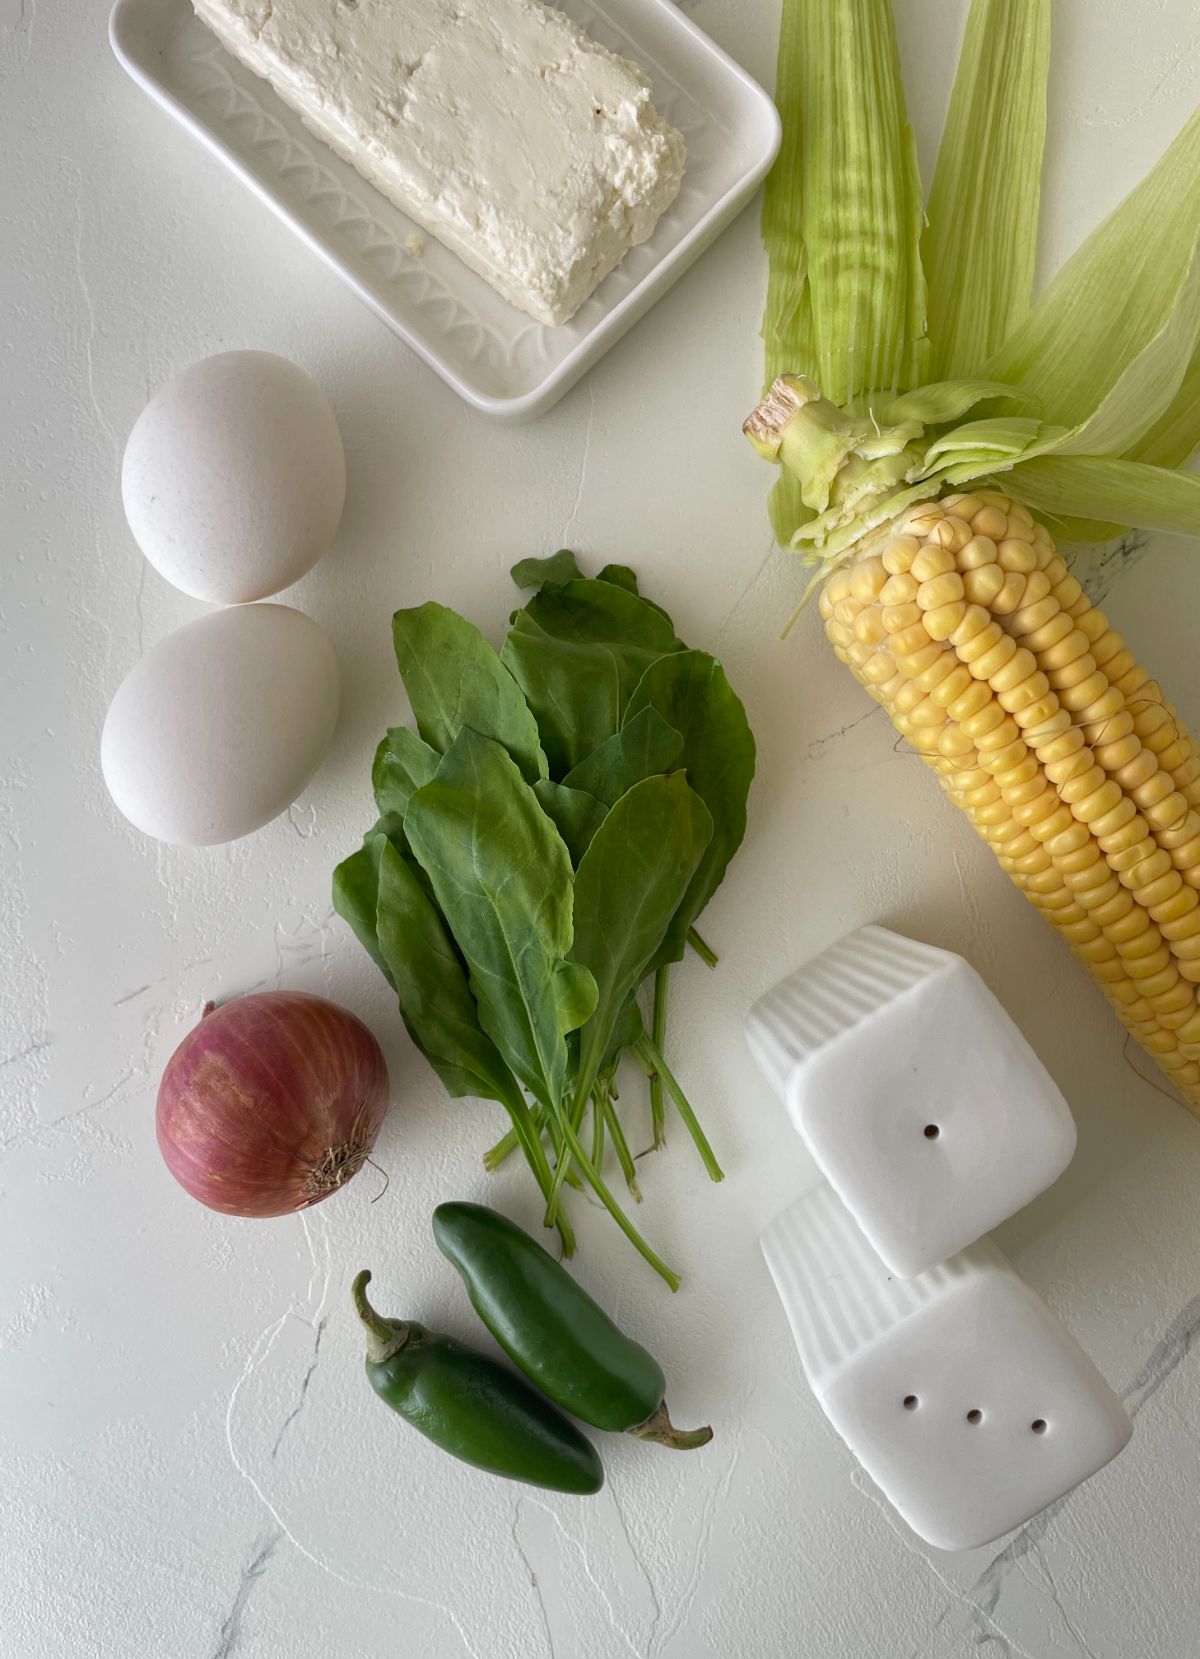 ingredients for the corn spinach and feta frittata